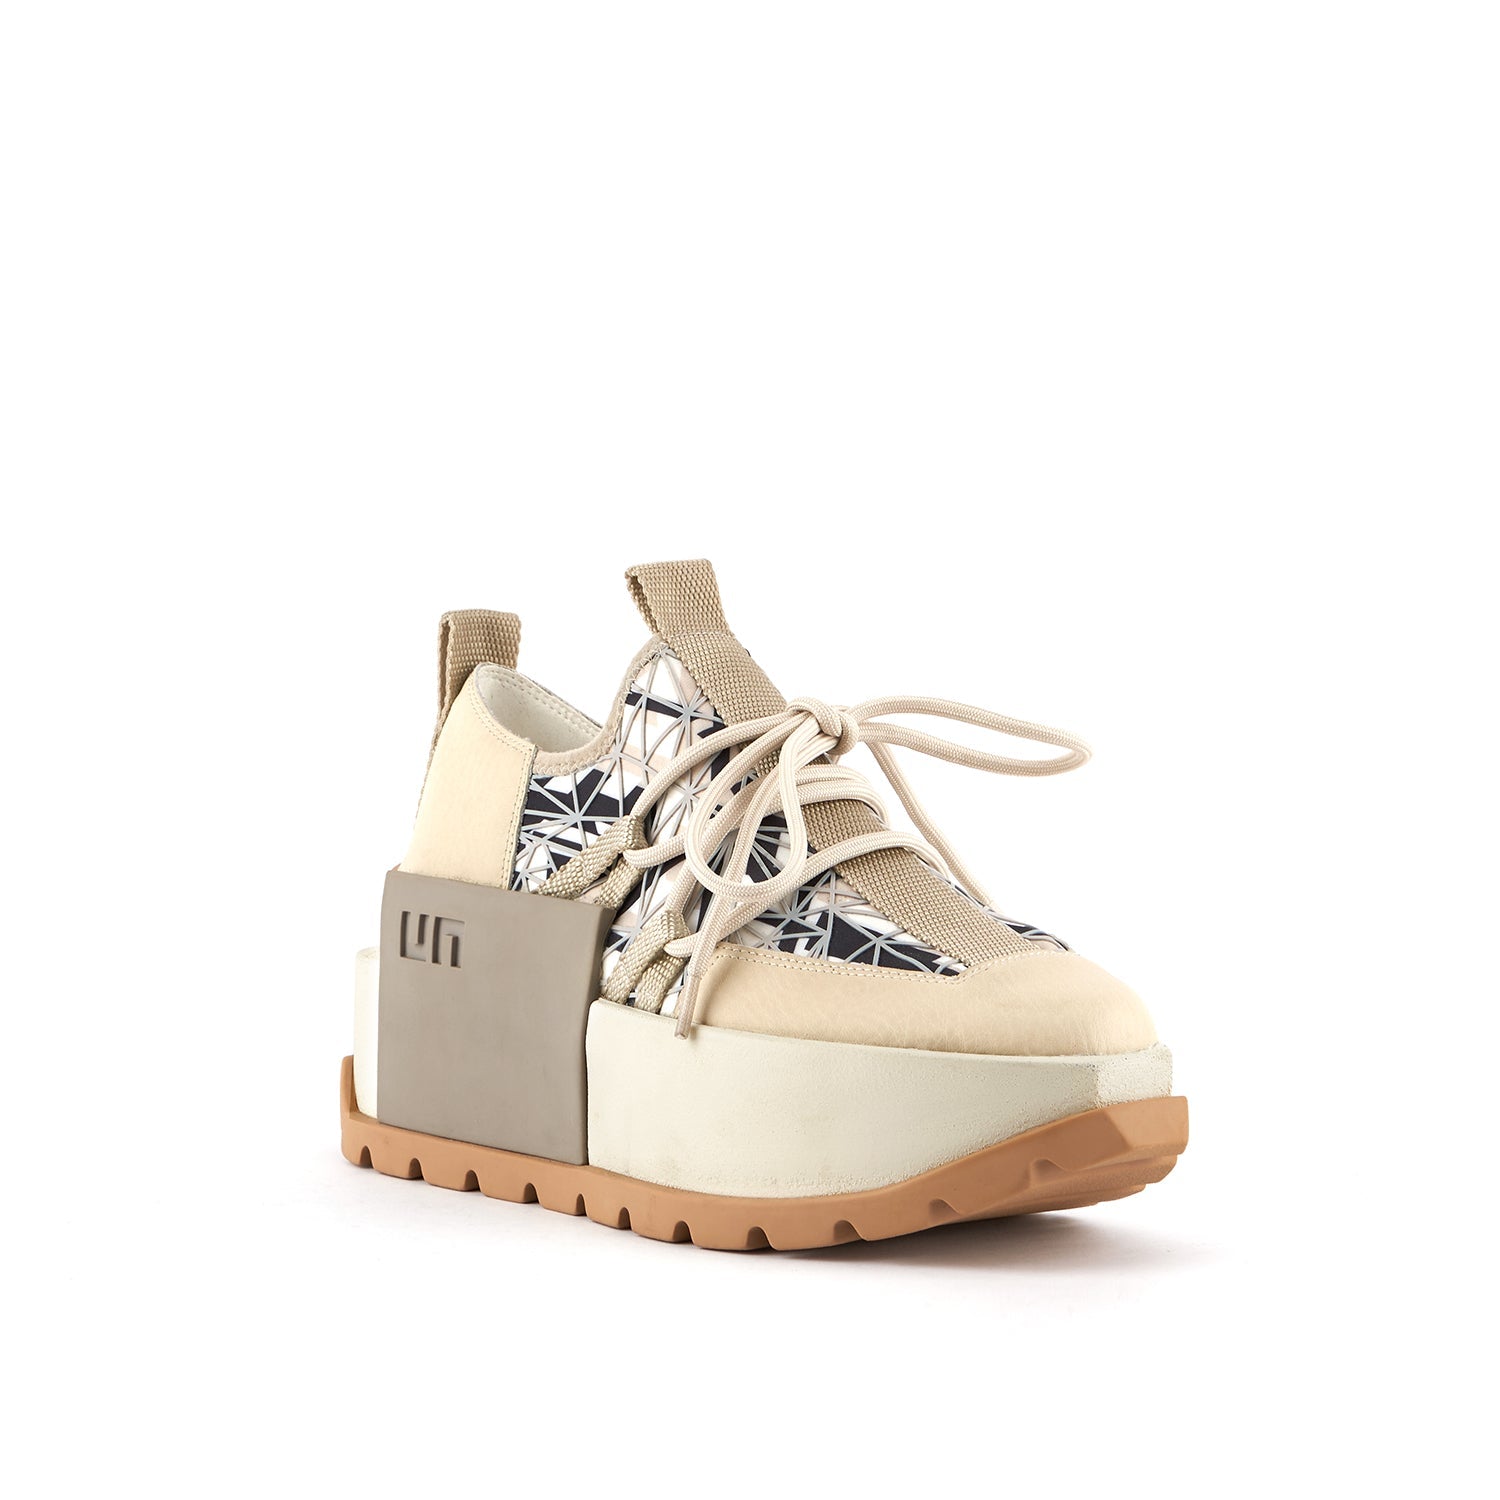 outer front side view of the united nude roko hype sneaker in the color beige/natural. This sneaker has a wedge platform sole, a lace up front, a black and white geometric design, and a decorative square on the outer side with the United Nude logo.